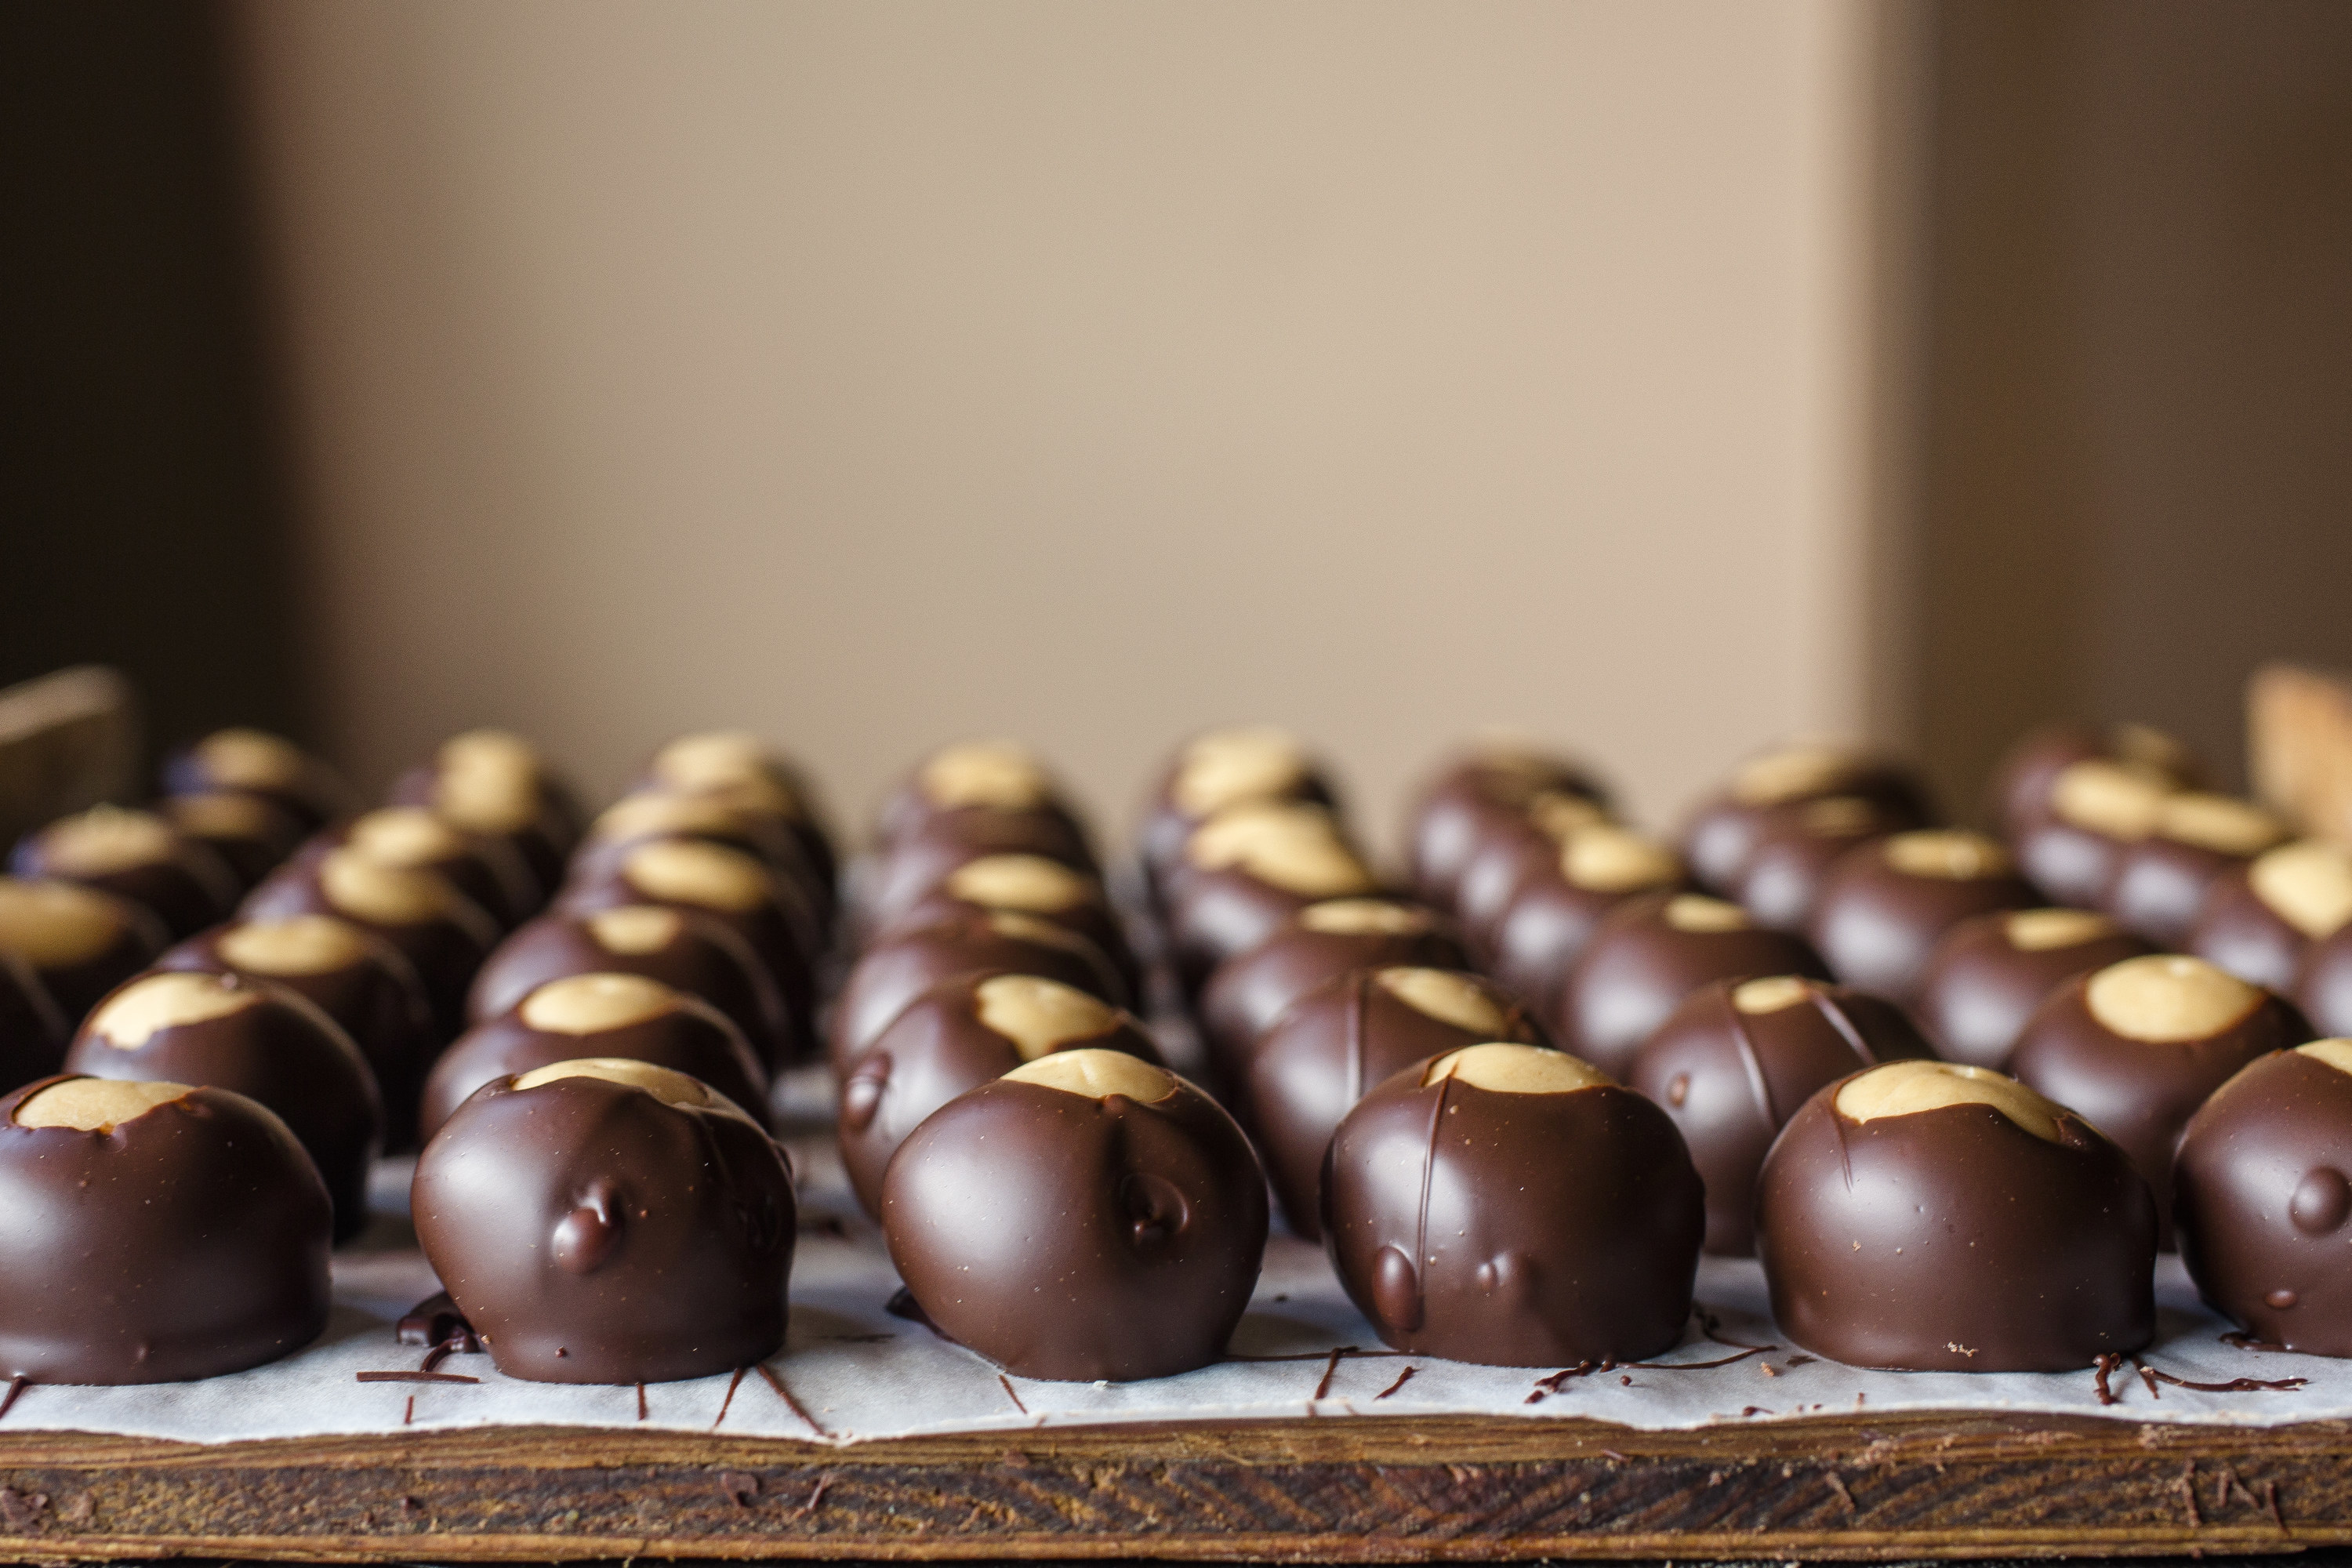 Six rows of buckeyes, chocolate-covered peanut butter candies, cooling off on parchment paper